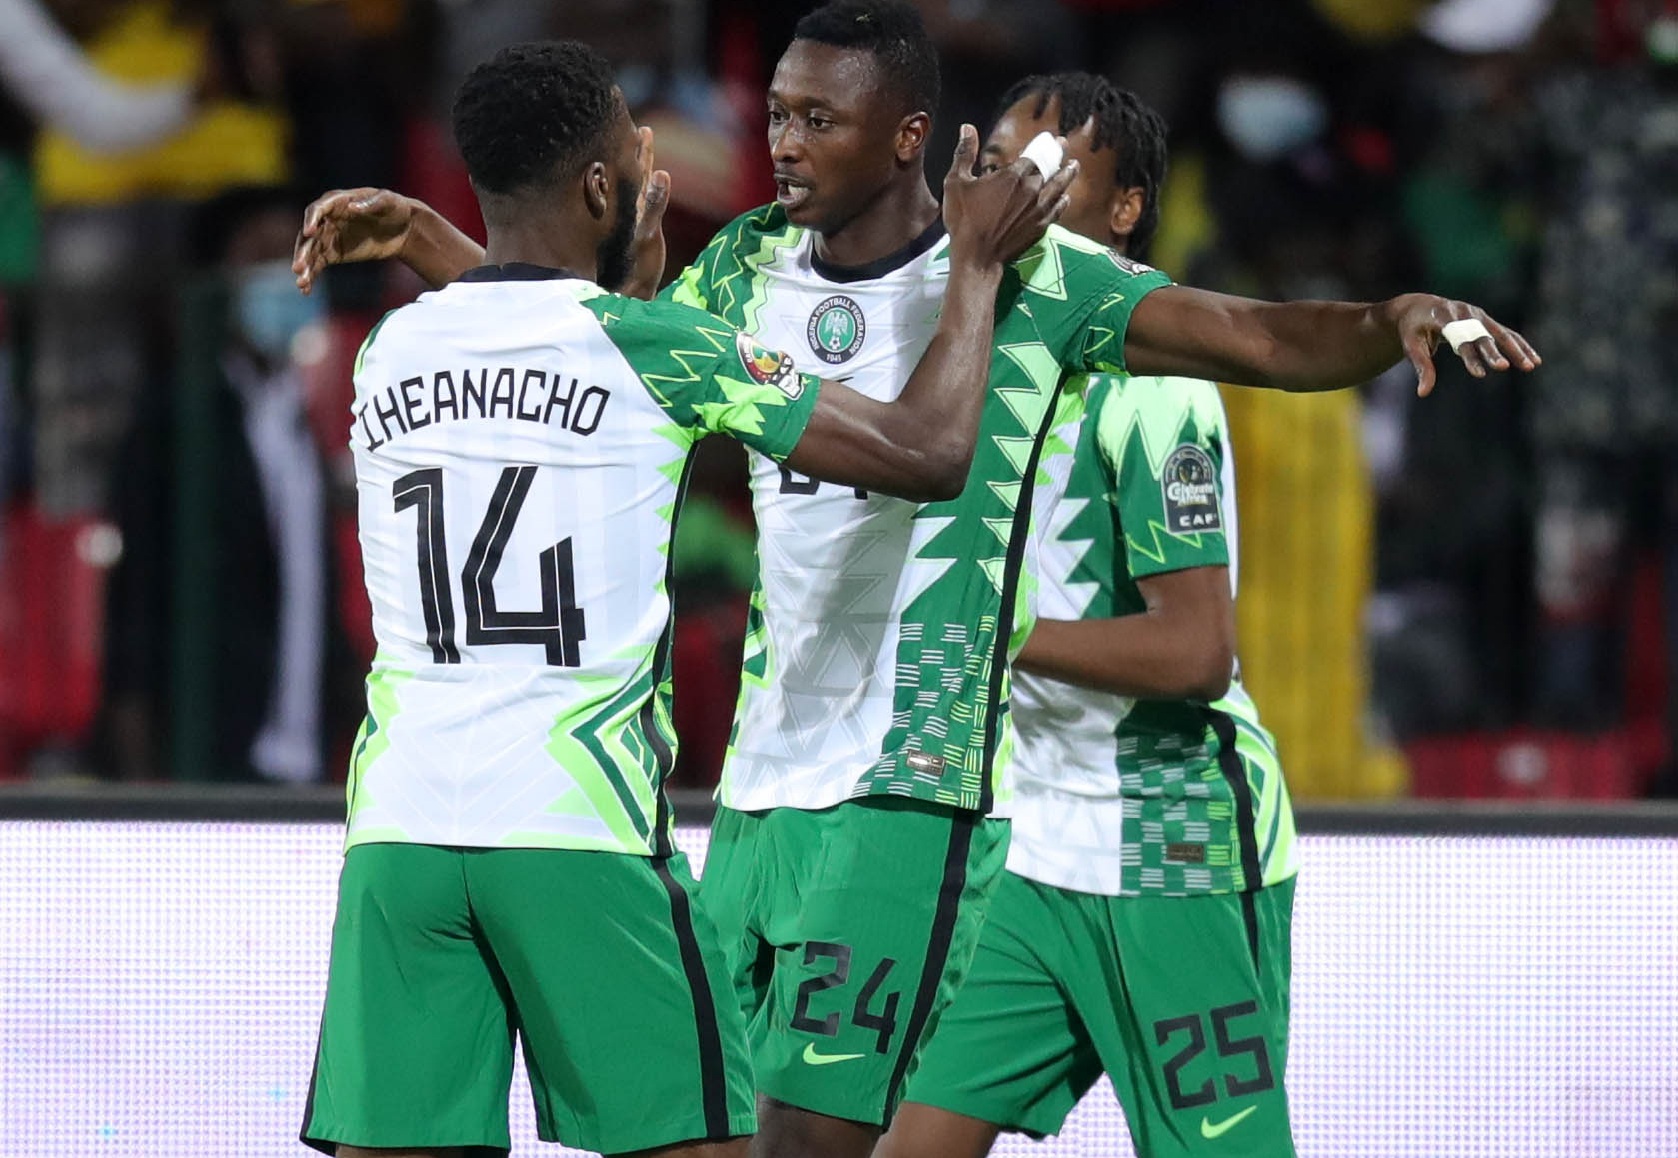 AFCON: Super Eagles Heads To The Next With 100% Record